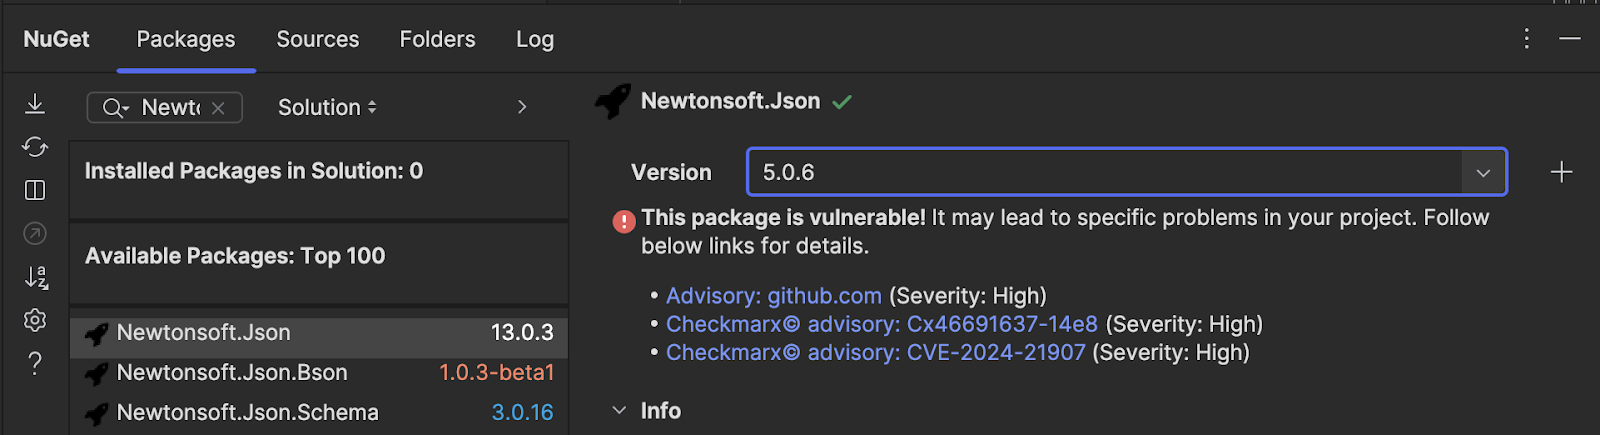 Checkmarx warning for a vulnerable package in NuGet Tool Window